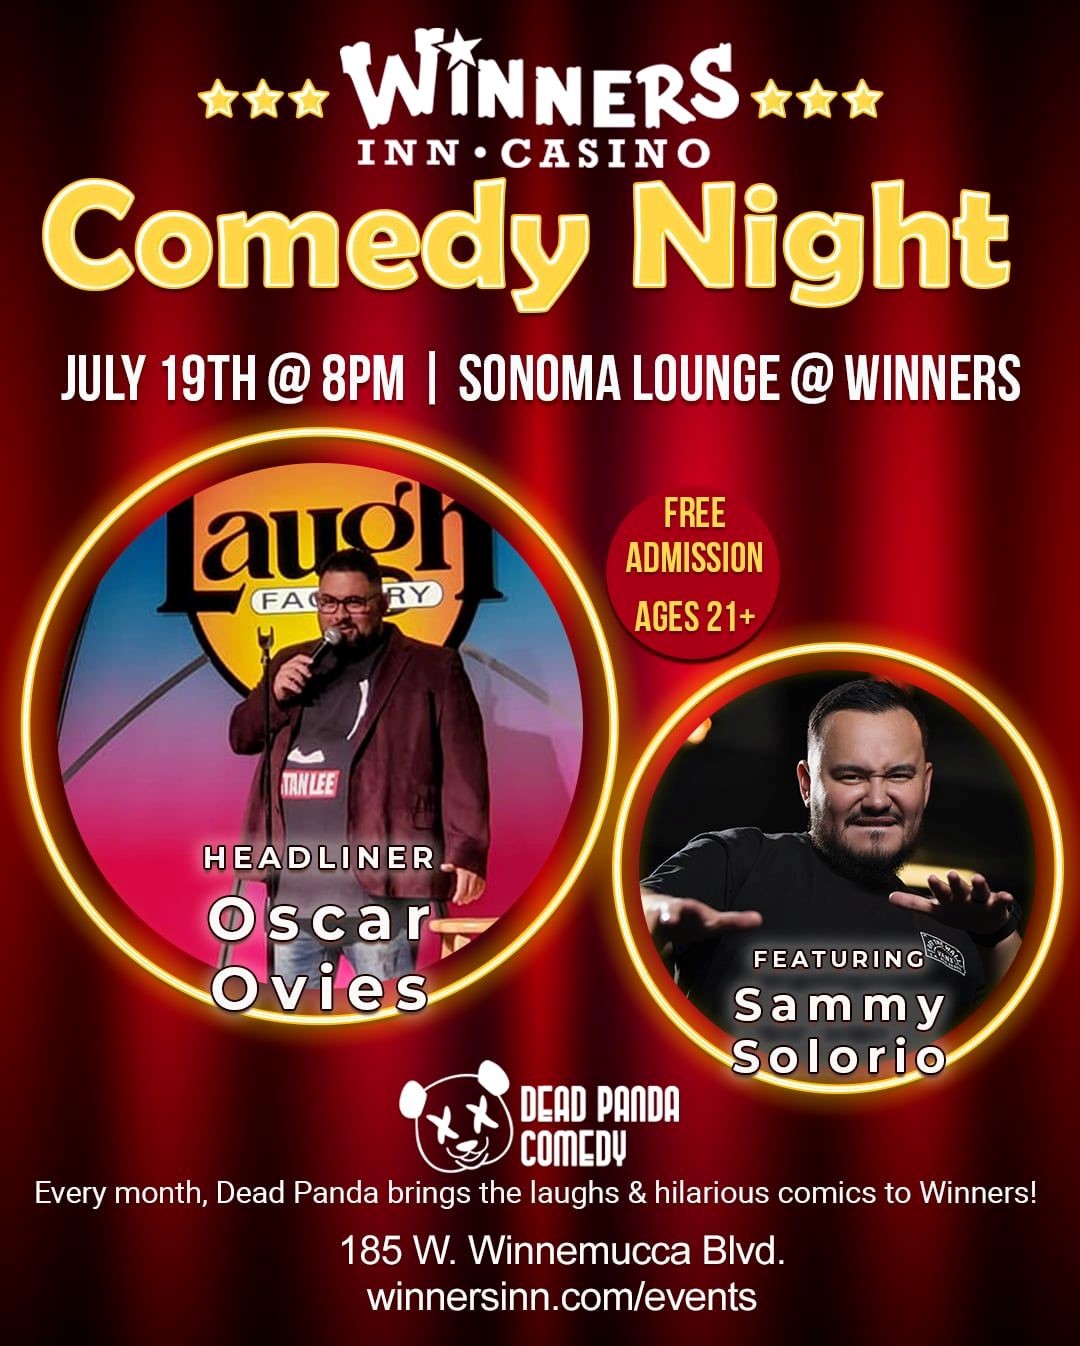 Featured Comedy in the Sonoma Lounge